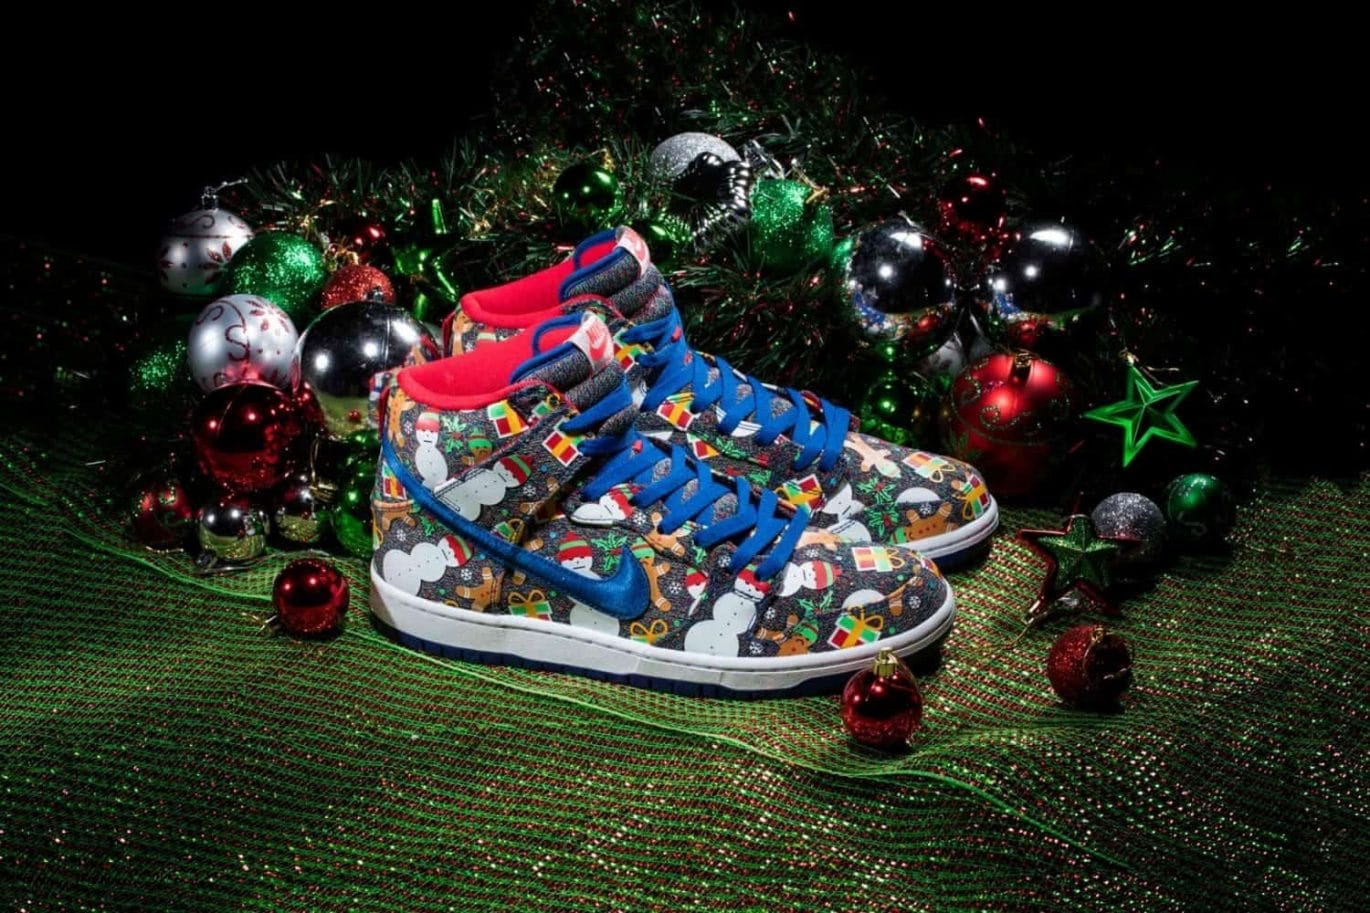 Concepts x Nike SB Dunk High Ugly Sweater